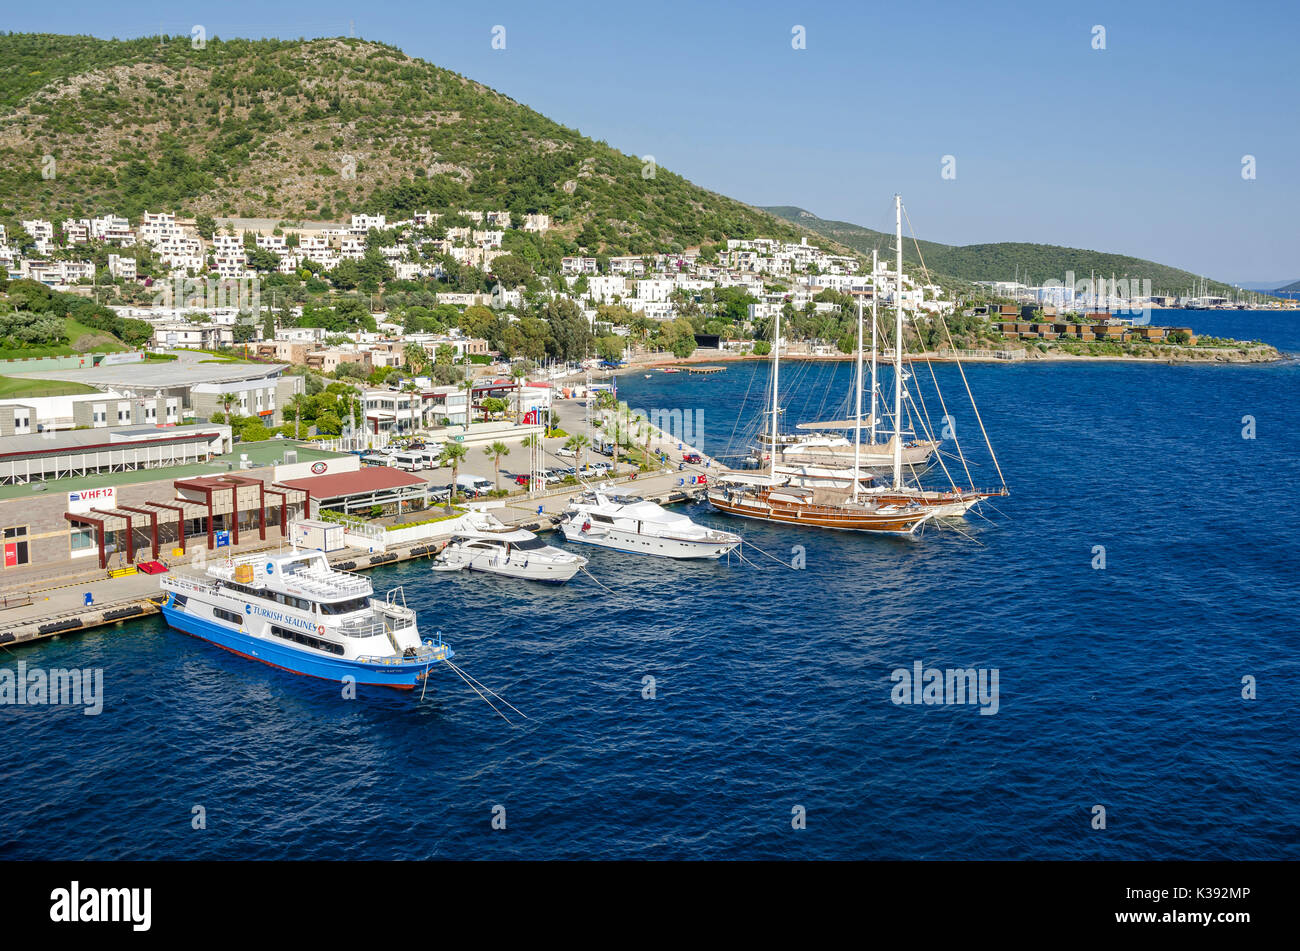 Bodrum, Turkey - June 1, 2017:  White city of  Bodrum with the Gulet type schooners (a two-masted wooden sailing vessel), popular for tourist charters Stock Photo